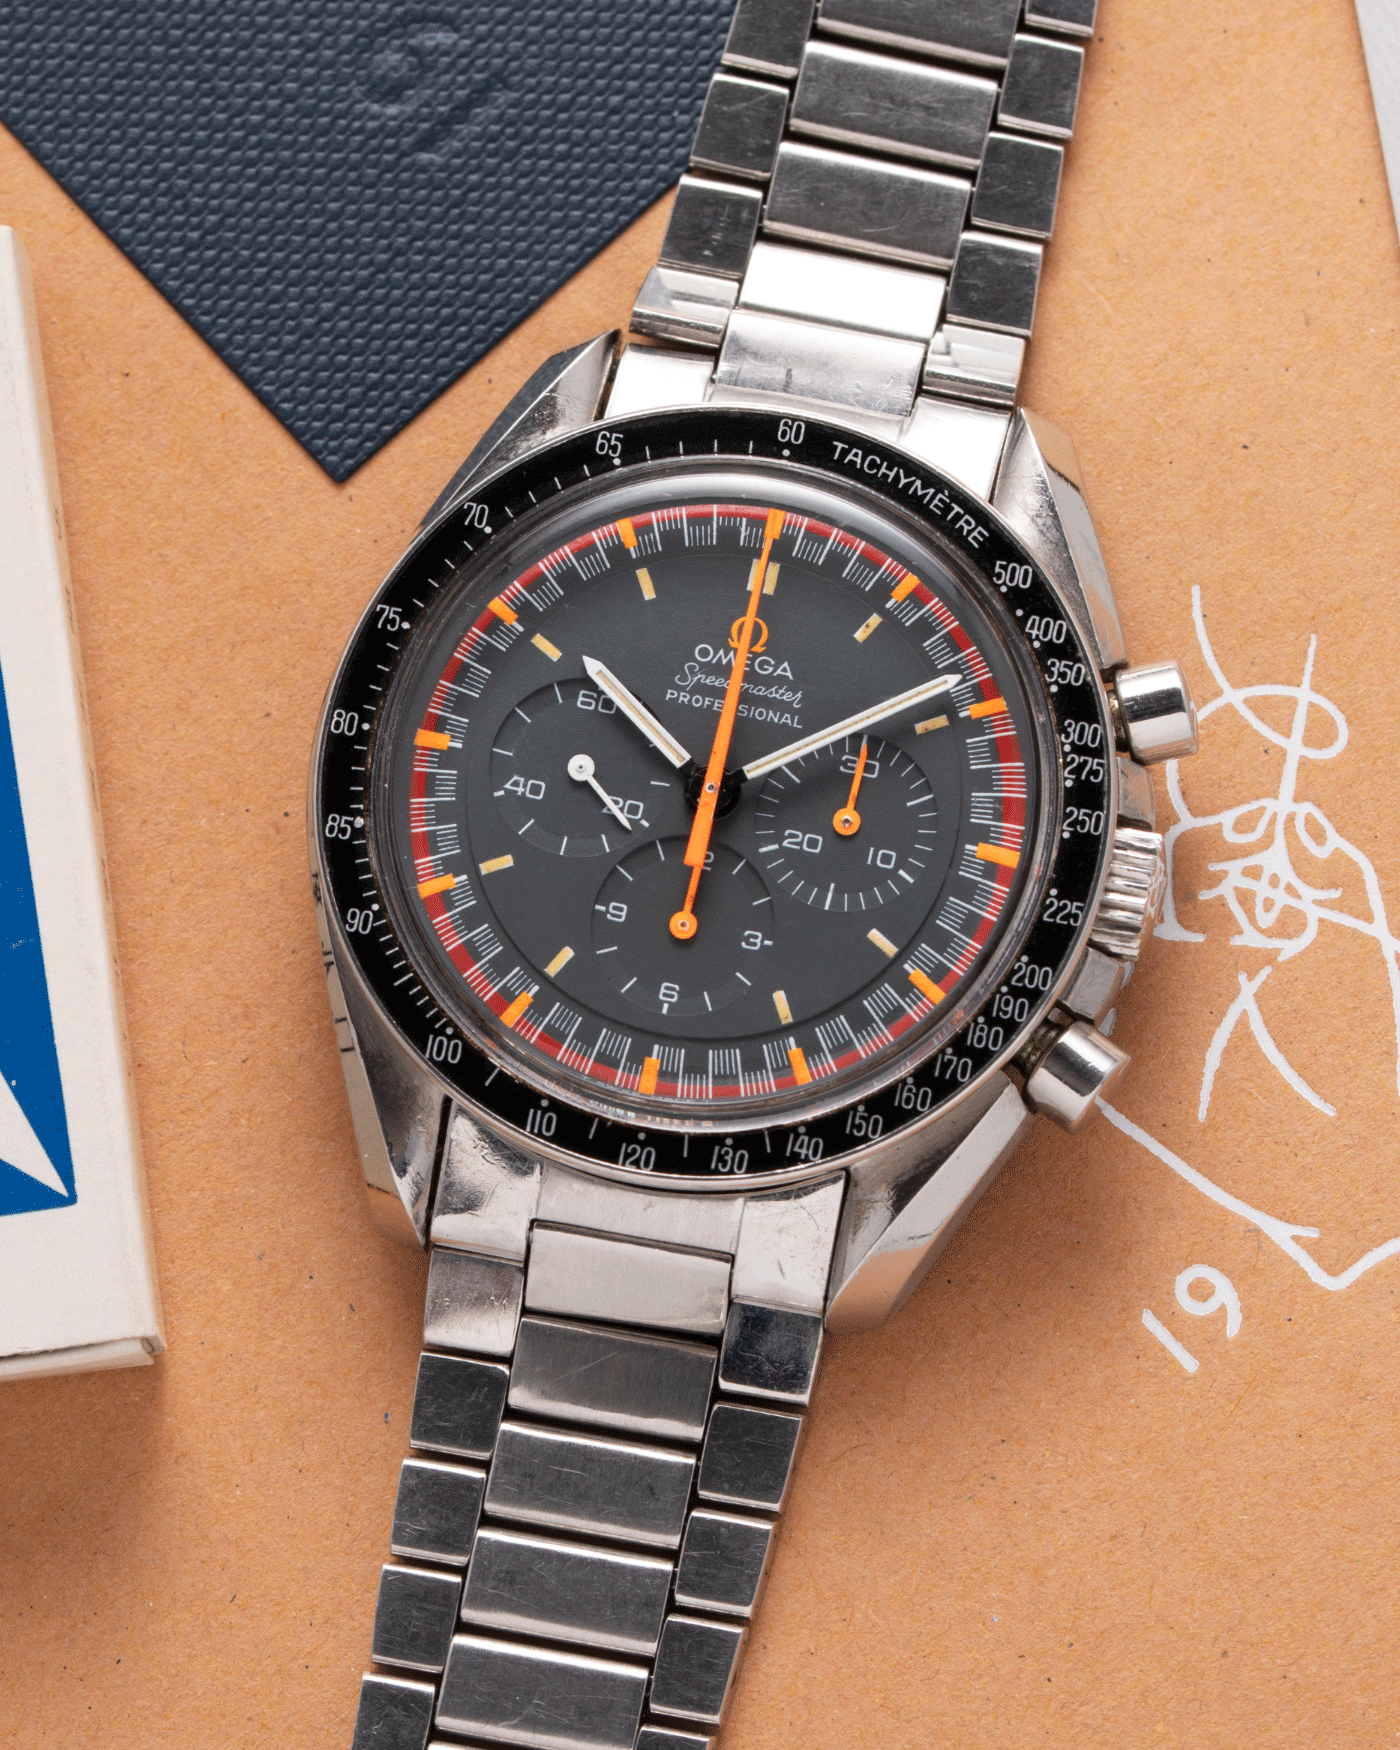 Brand: Omega Year: June 1970 Model: Speedmaster Professional Racing Dial Reference Number: 145.022 Serial Number: 29XXXXXX Material: Stainless Steel Movement: Cal. 861 Case Diameter: 42mm Lug Width: 20mm Bracelet/Strap: Omega 1039 Flat Link Bracelet Dated 2.70 with 516 End Links